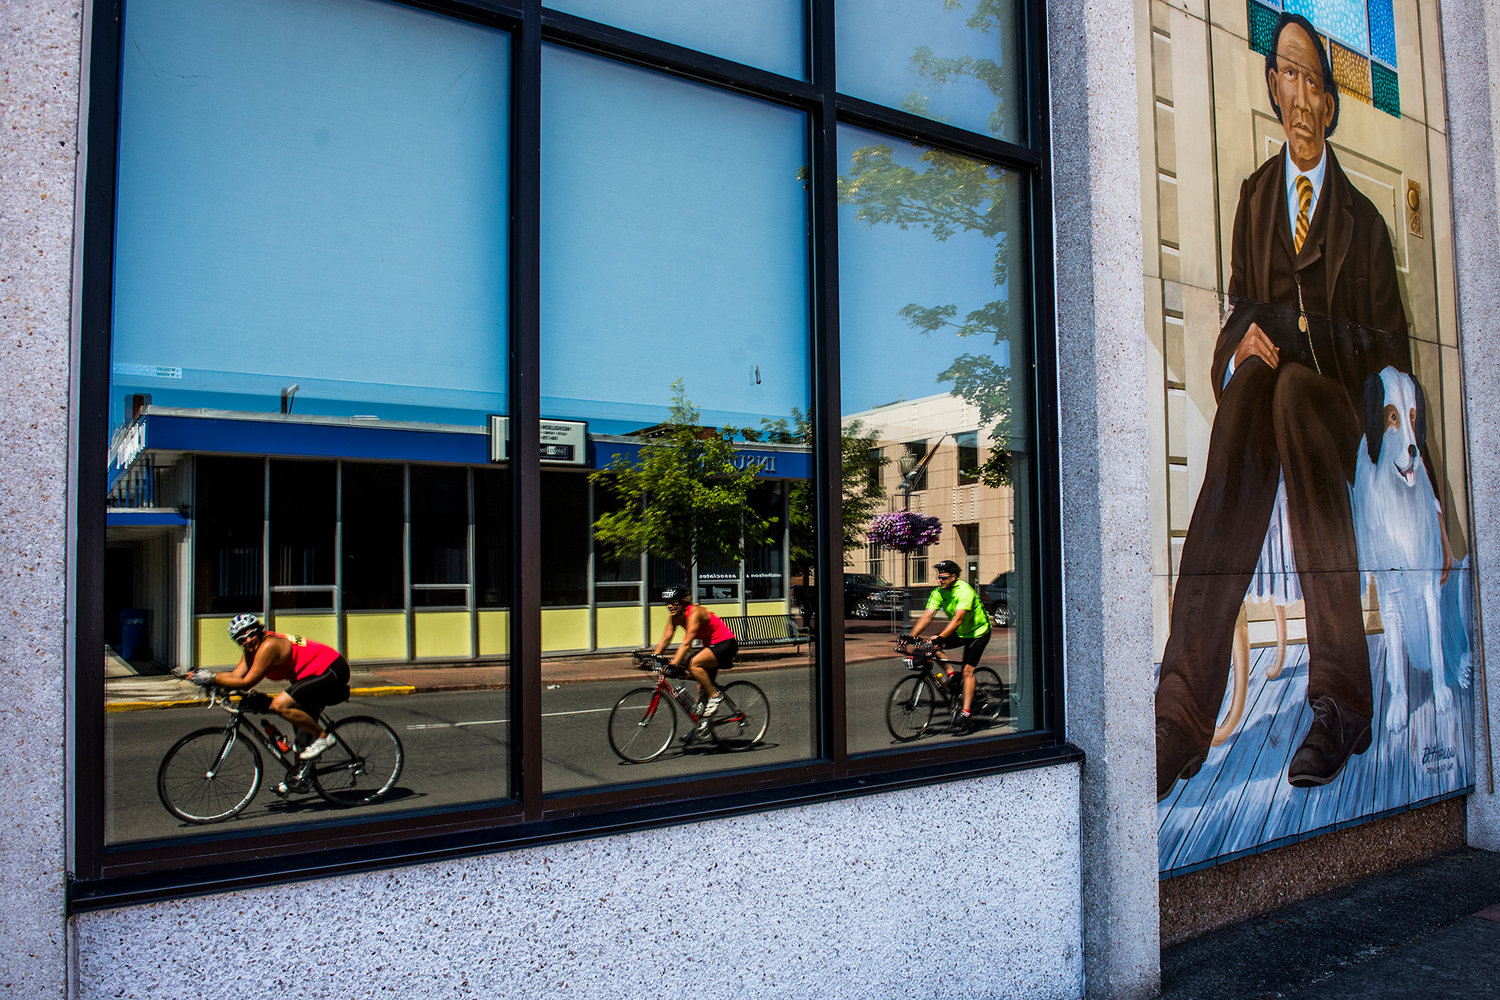 A trio of cyclists make their way along Pearl Street on Saturday afternoon while a mural of George Washington and his trusty dog keep a watchful eye.